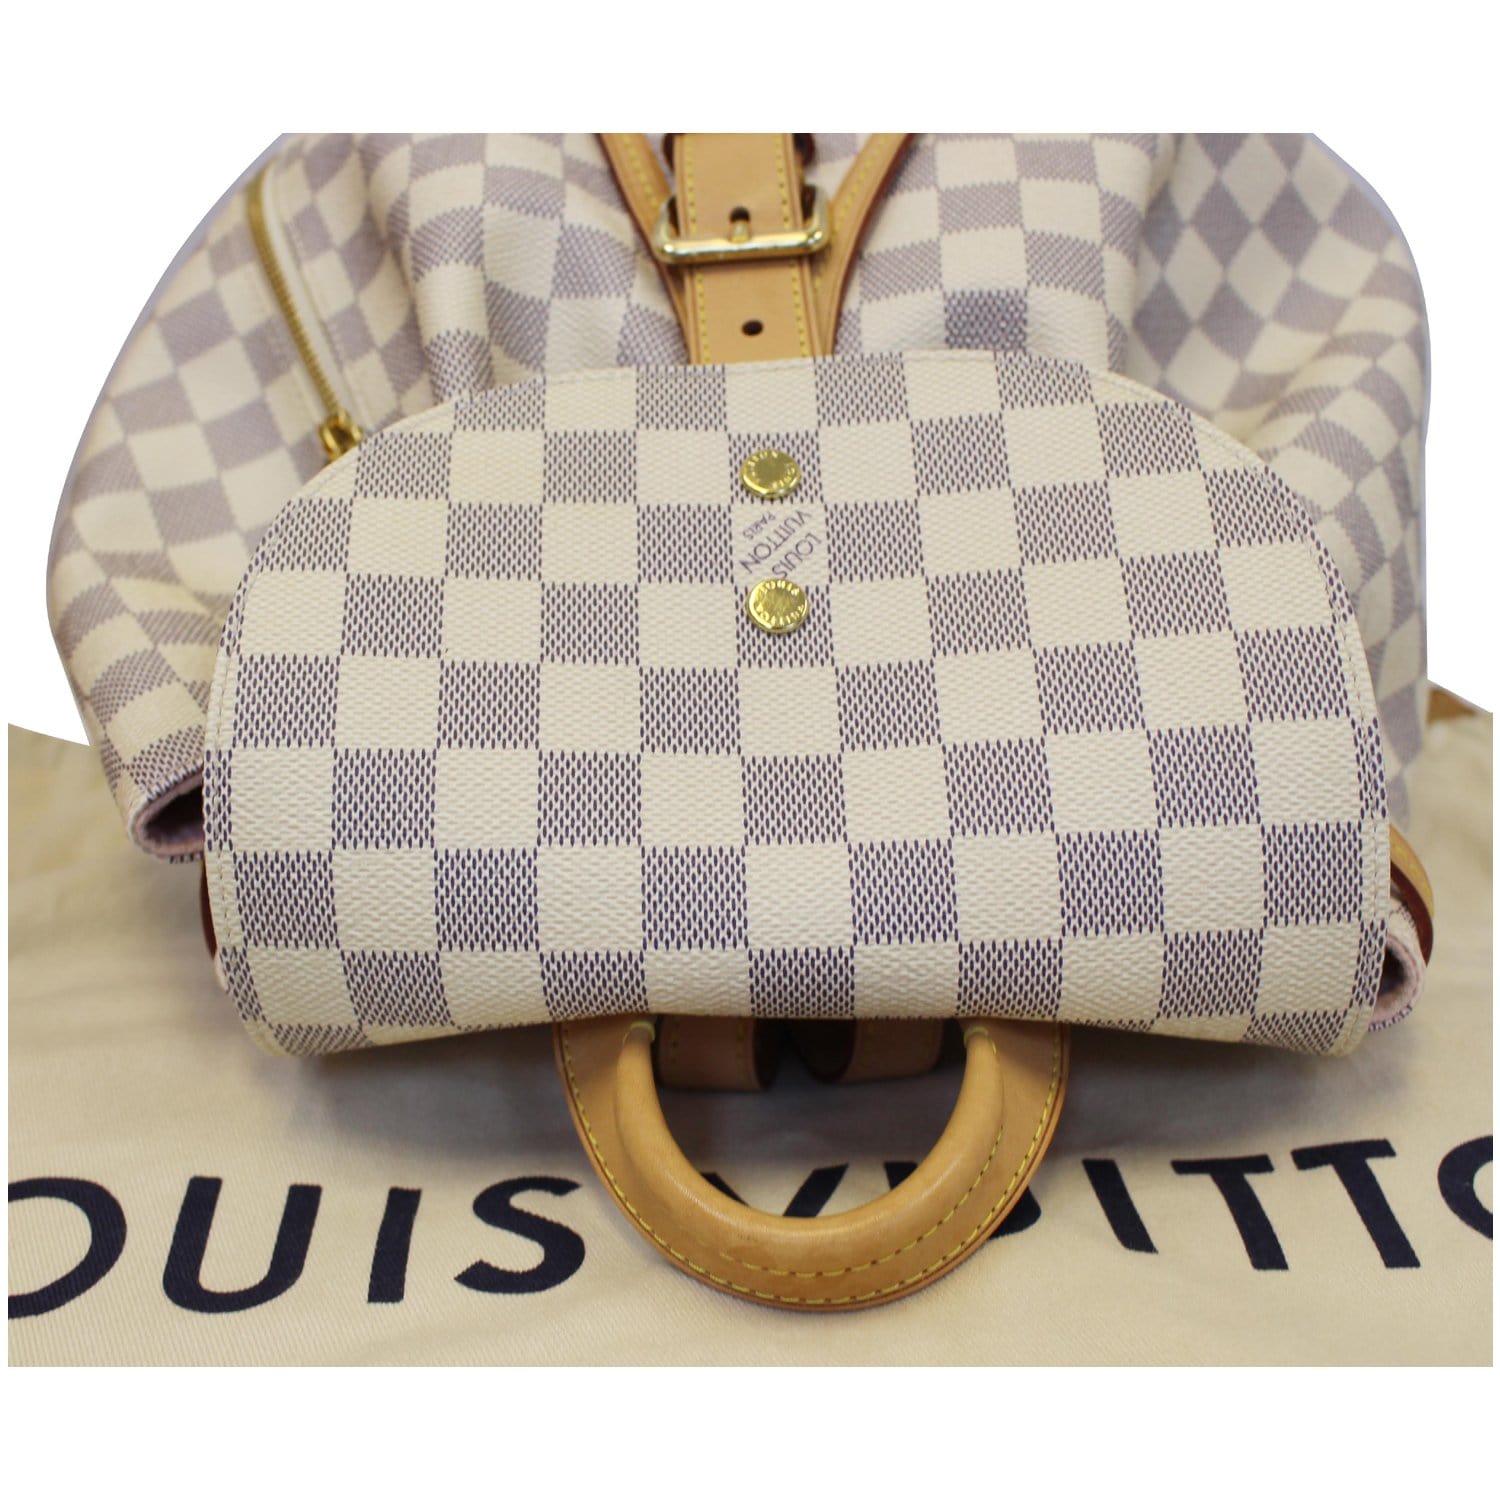 Louis Vuitton Damier Azur Sperone Backpack Multiple - $2500 - From